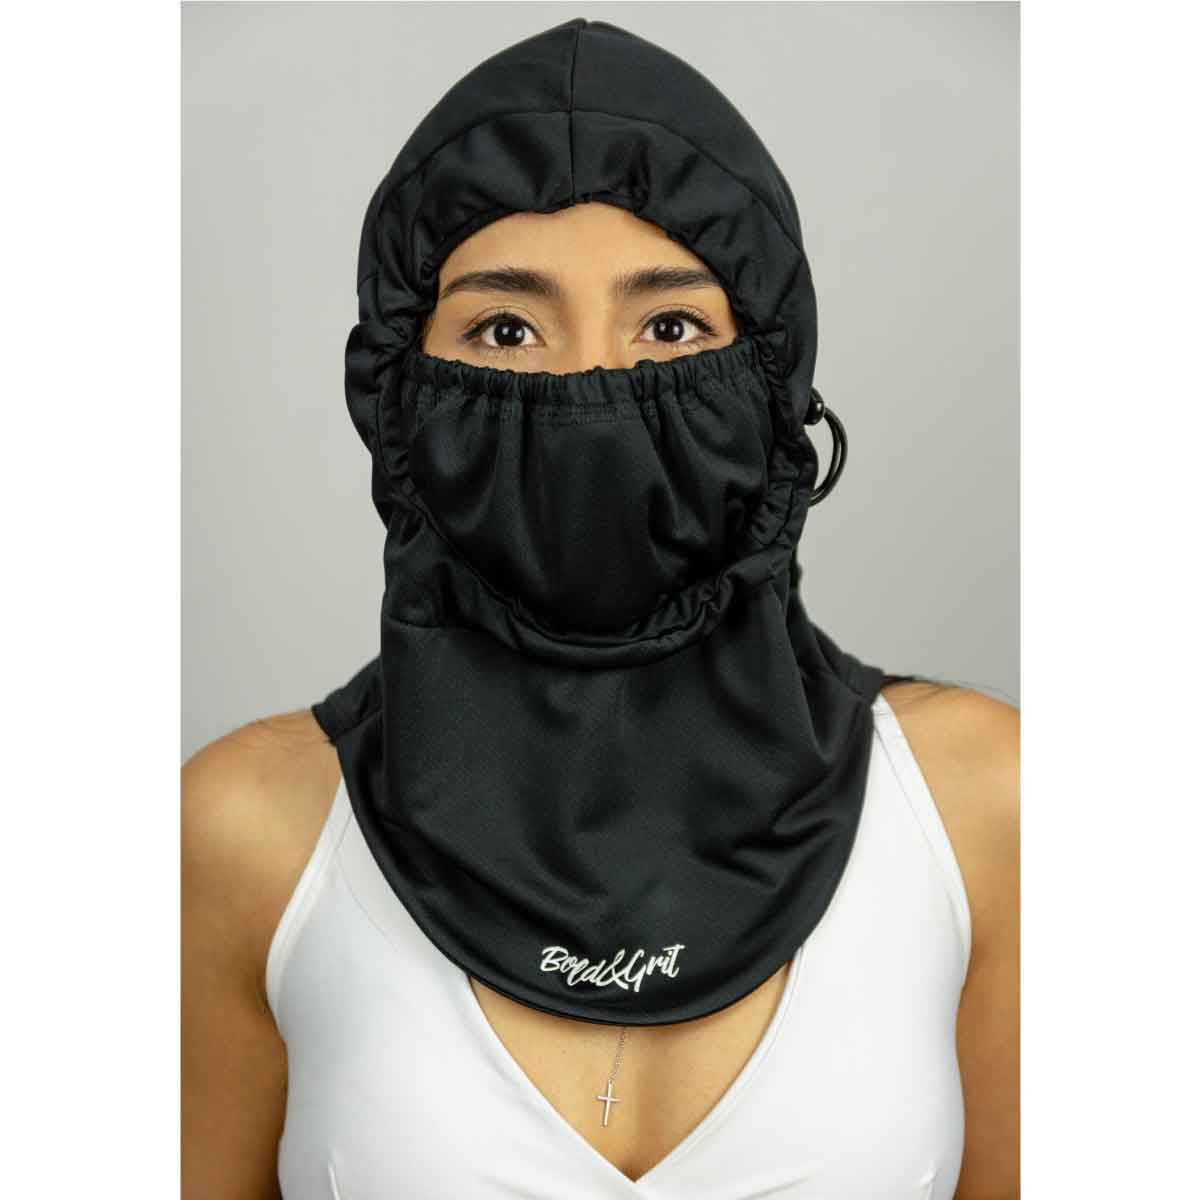  PROTECTIVE BLACK HOODIE - FACE MASK INCLUDED